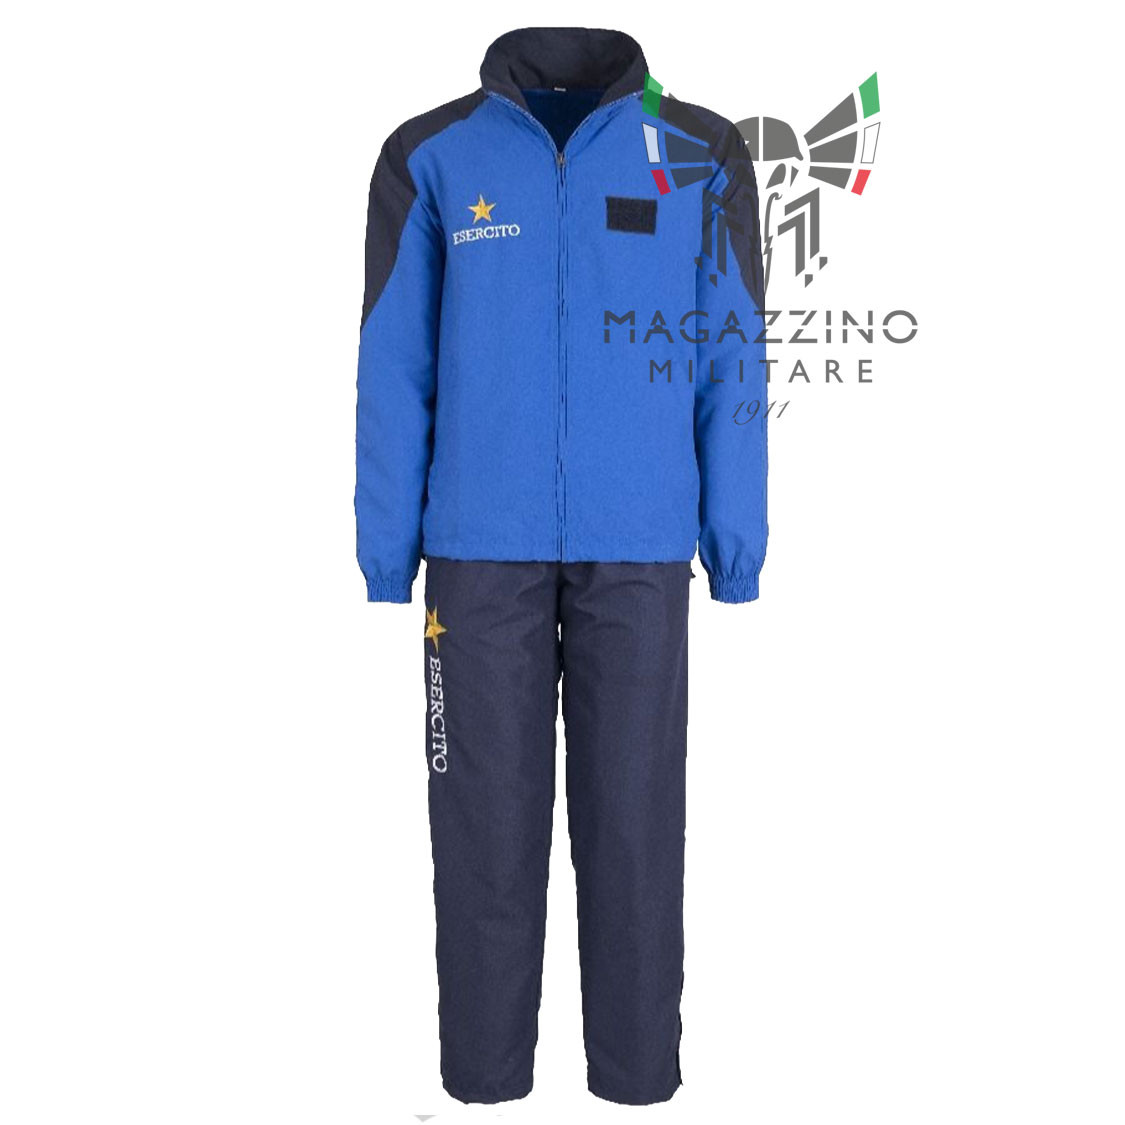 TRACKSUIT BLUE LIGHT BLUE Embroidered Military ITALIAN ARMY Original NEW front